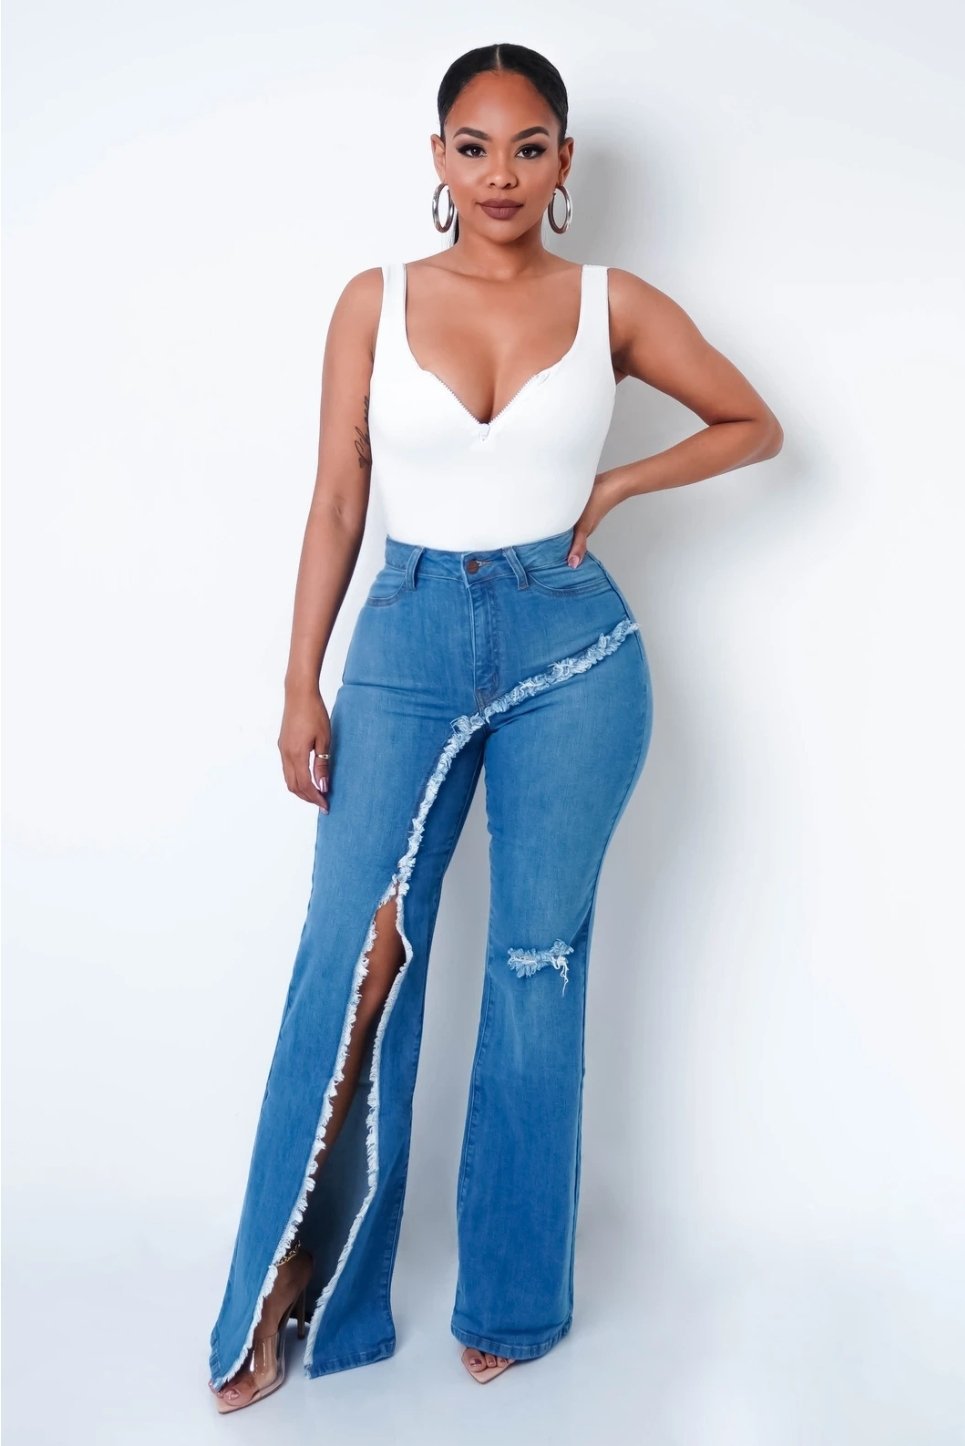 Women Ripped Flared jeans Pant